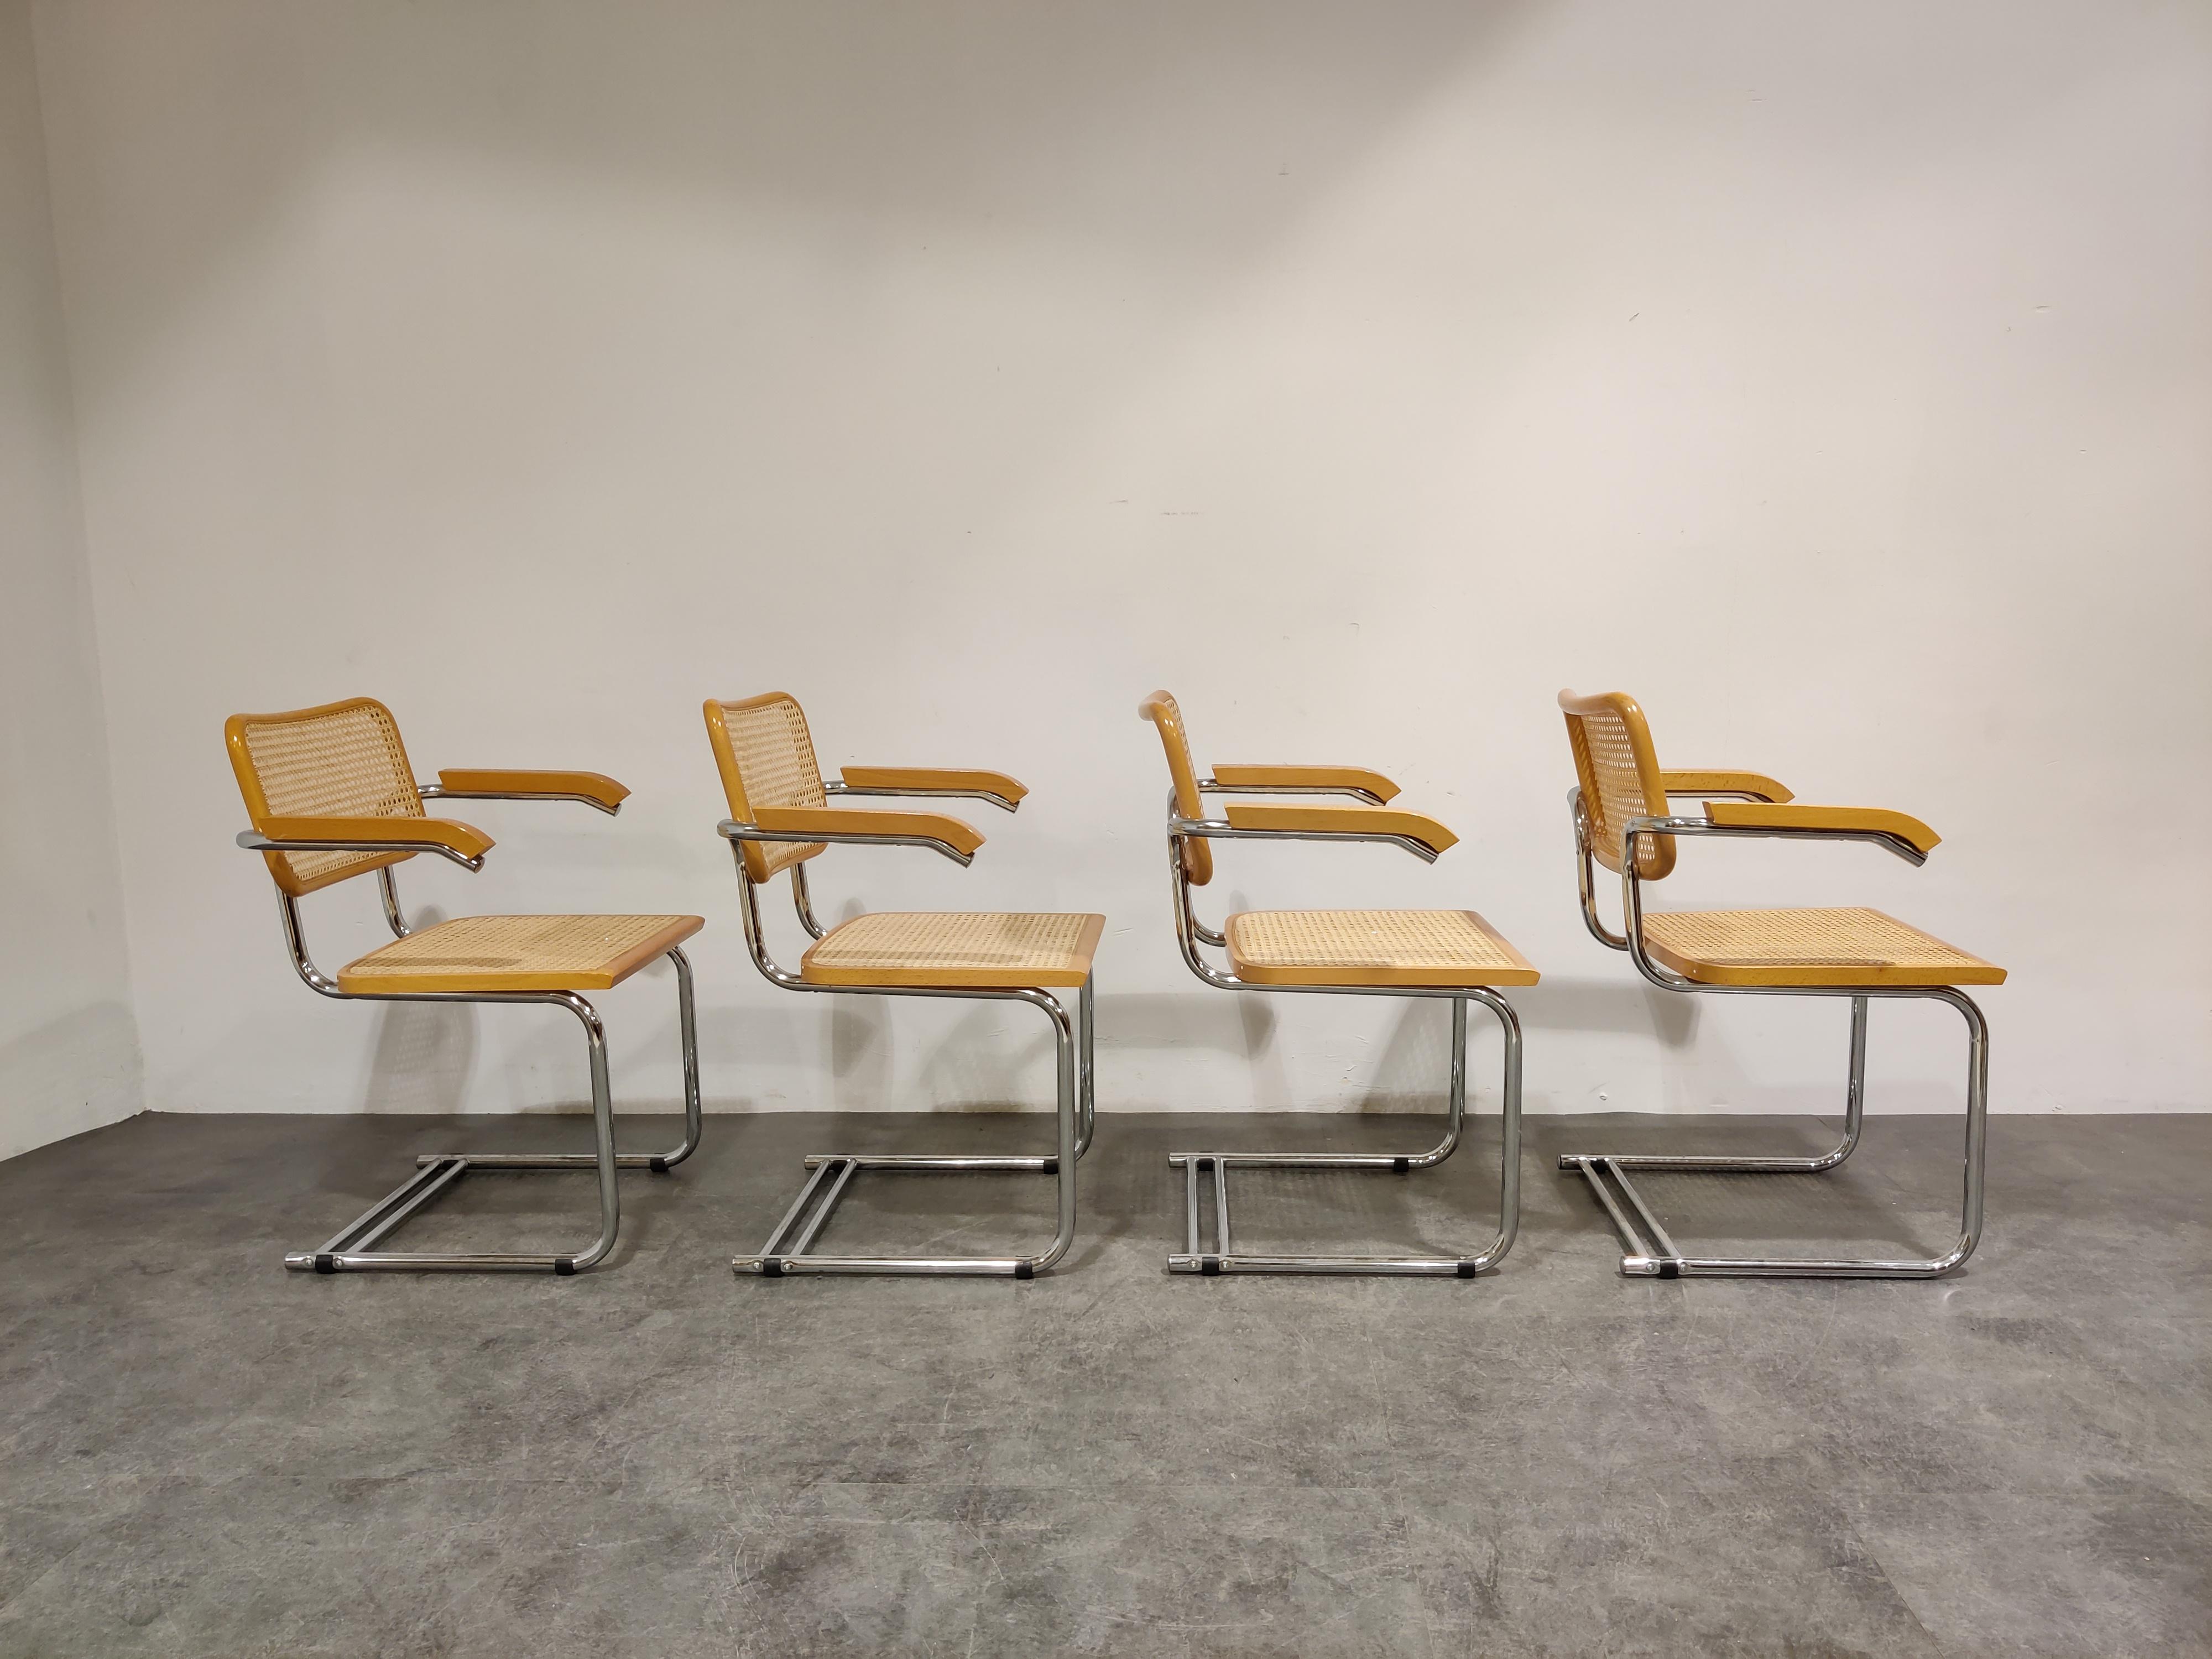 Late 20th Century Set of 4 Vintage Marcel Breuer Style Armchairs, Made in Italy, 1970s